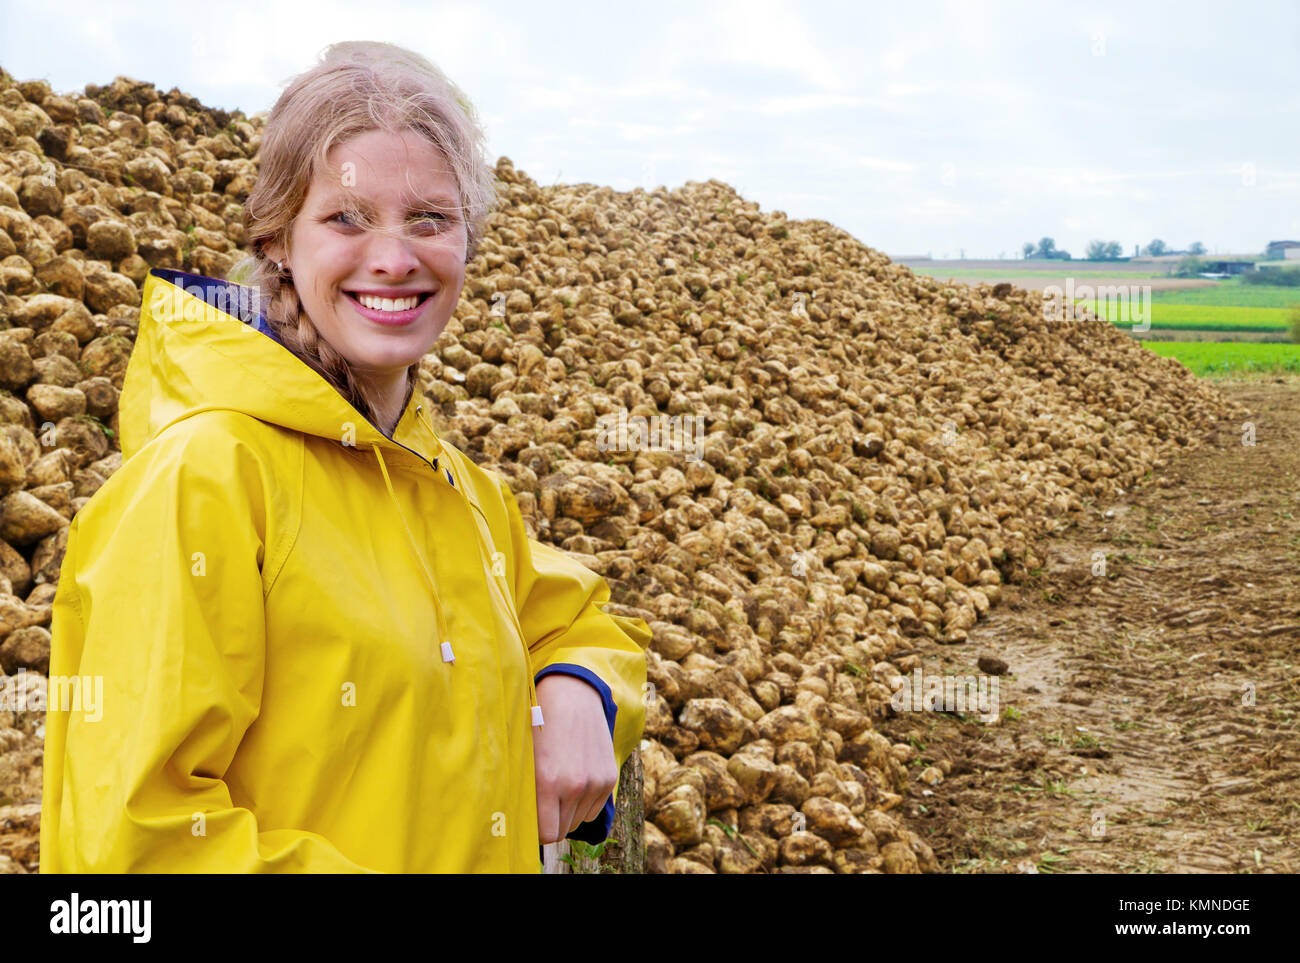 Young agriculturist in front of a heap with sugar beets Stock Photo